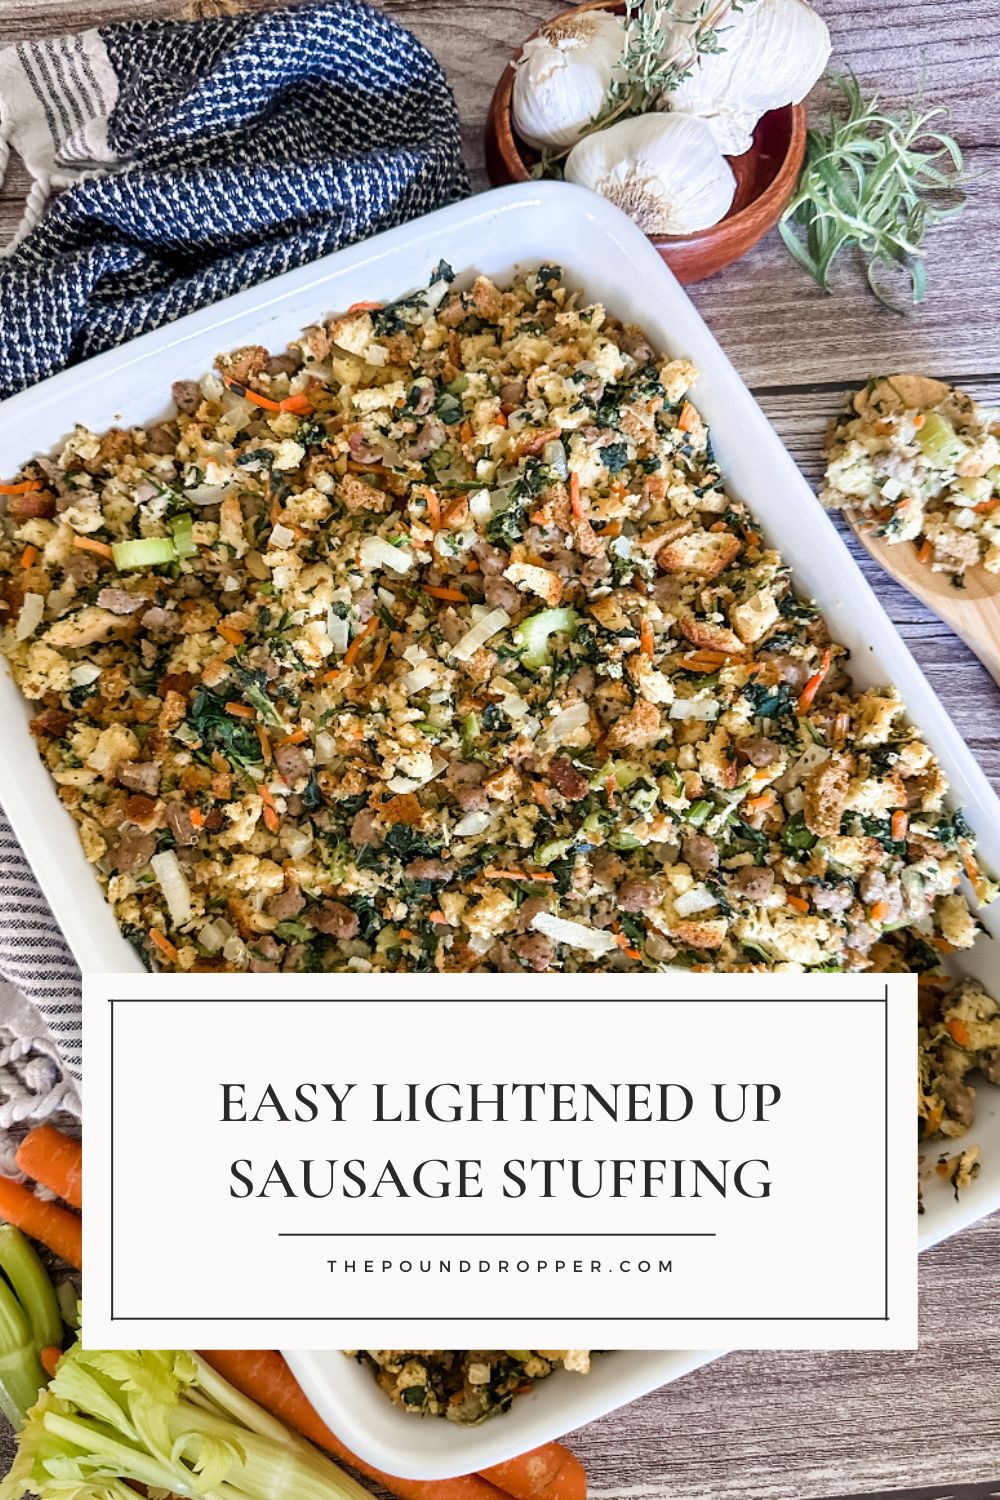 This Easy Lightened Up Sausage Stuffing is the BEST LIGHTENED UP stuffing recipe. Made with simple ingredients and with minimal effort, making it an easy side dish that is full of flavor! Perfect for your Thanksgiving feast! via @pounddropper